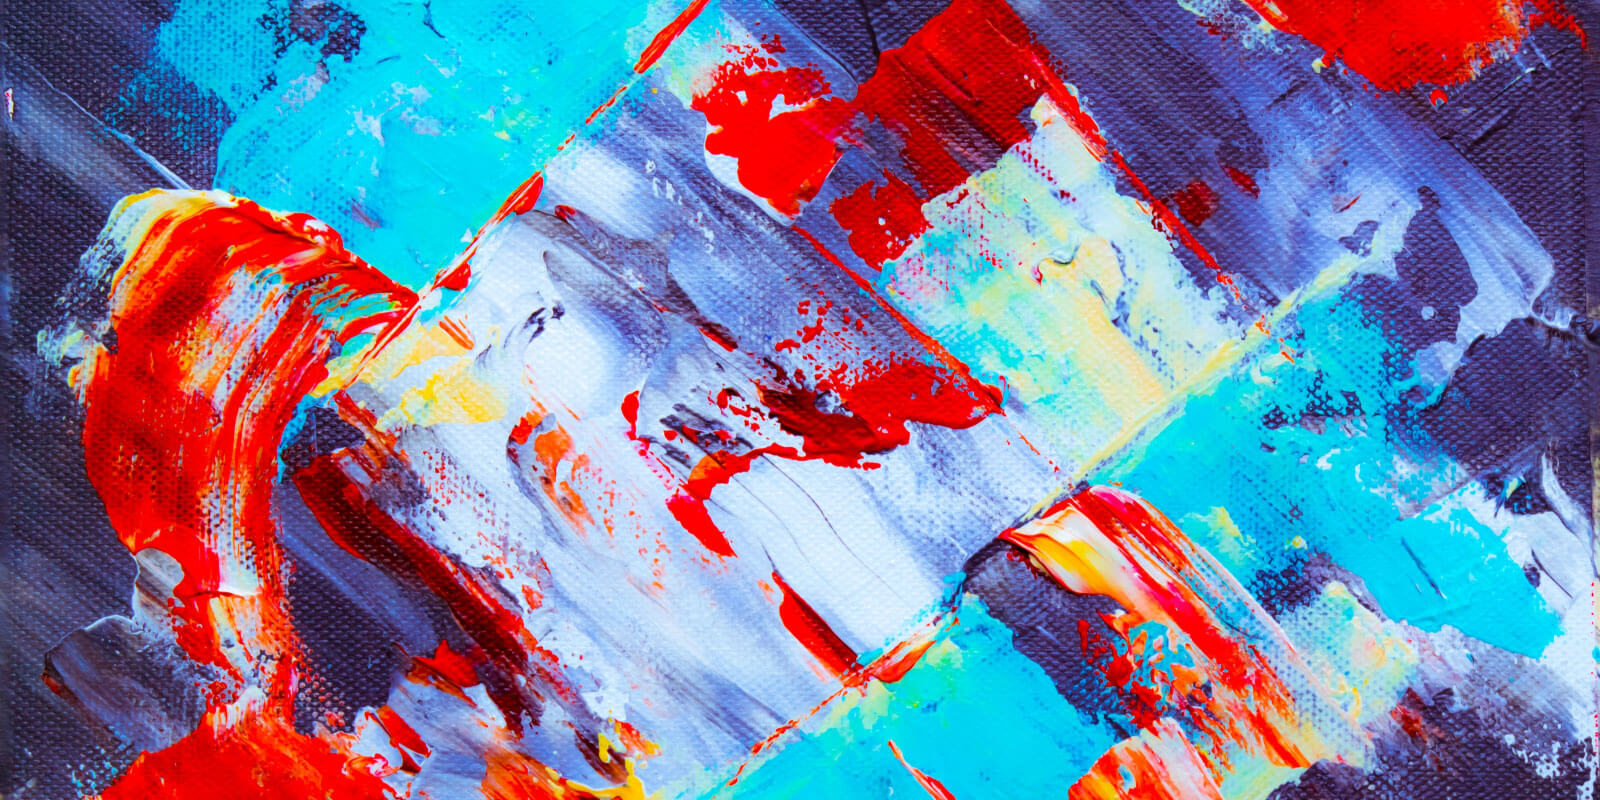 Abstract painting with bright colors